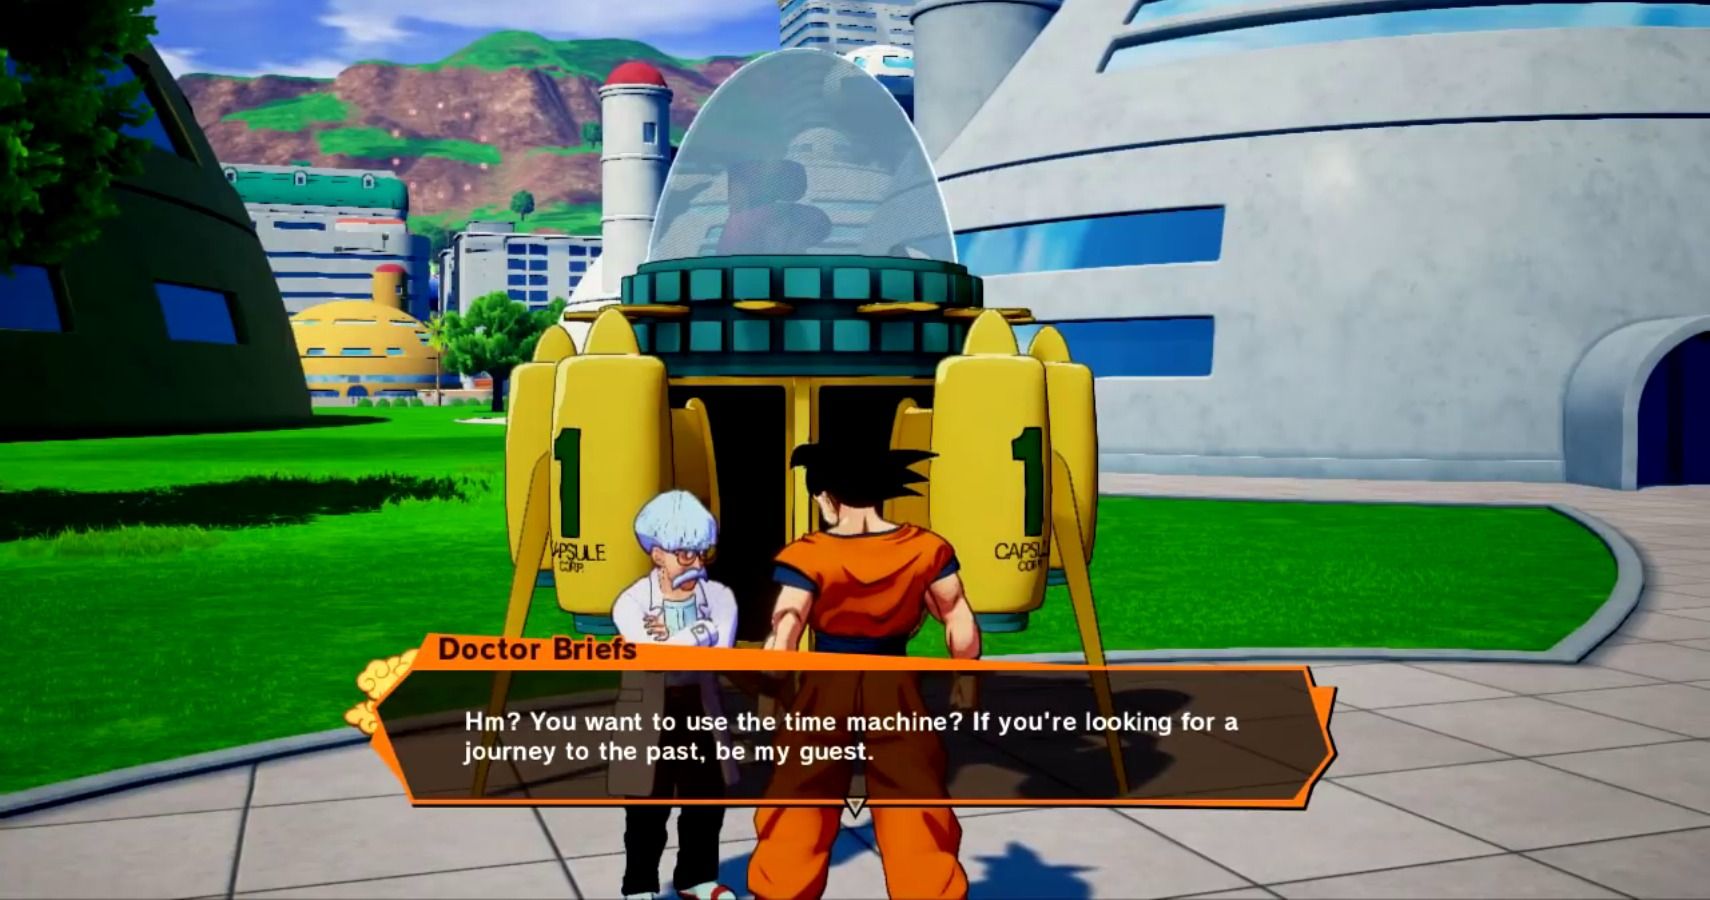 Dragon Ball Z Kakarot Review – The Reviewing Floor